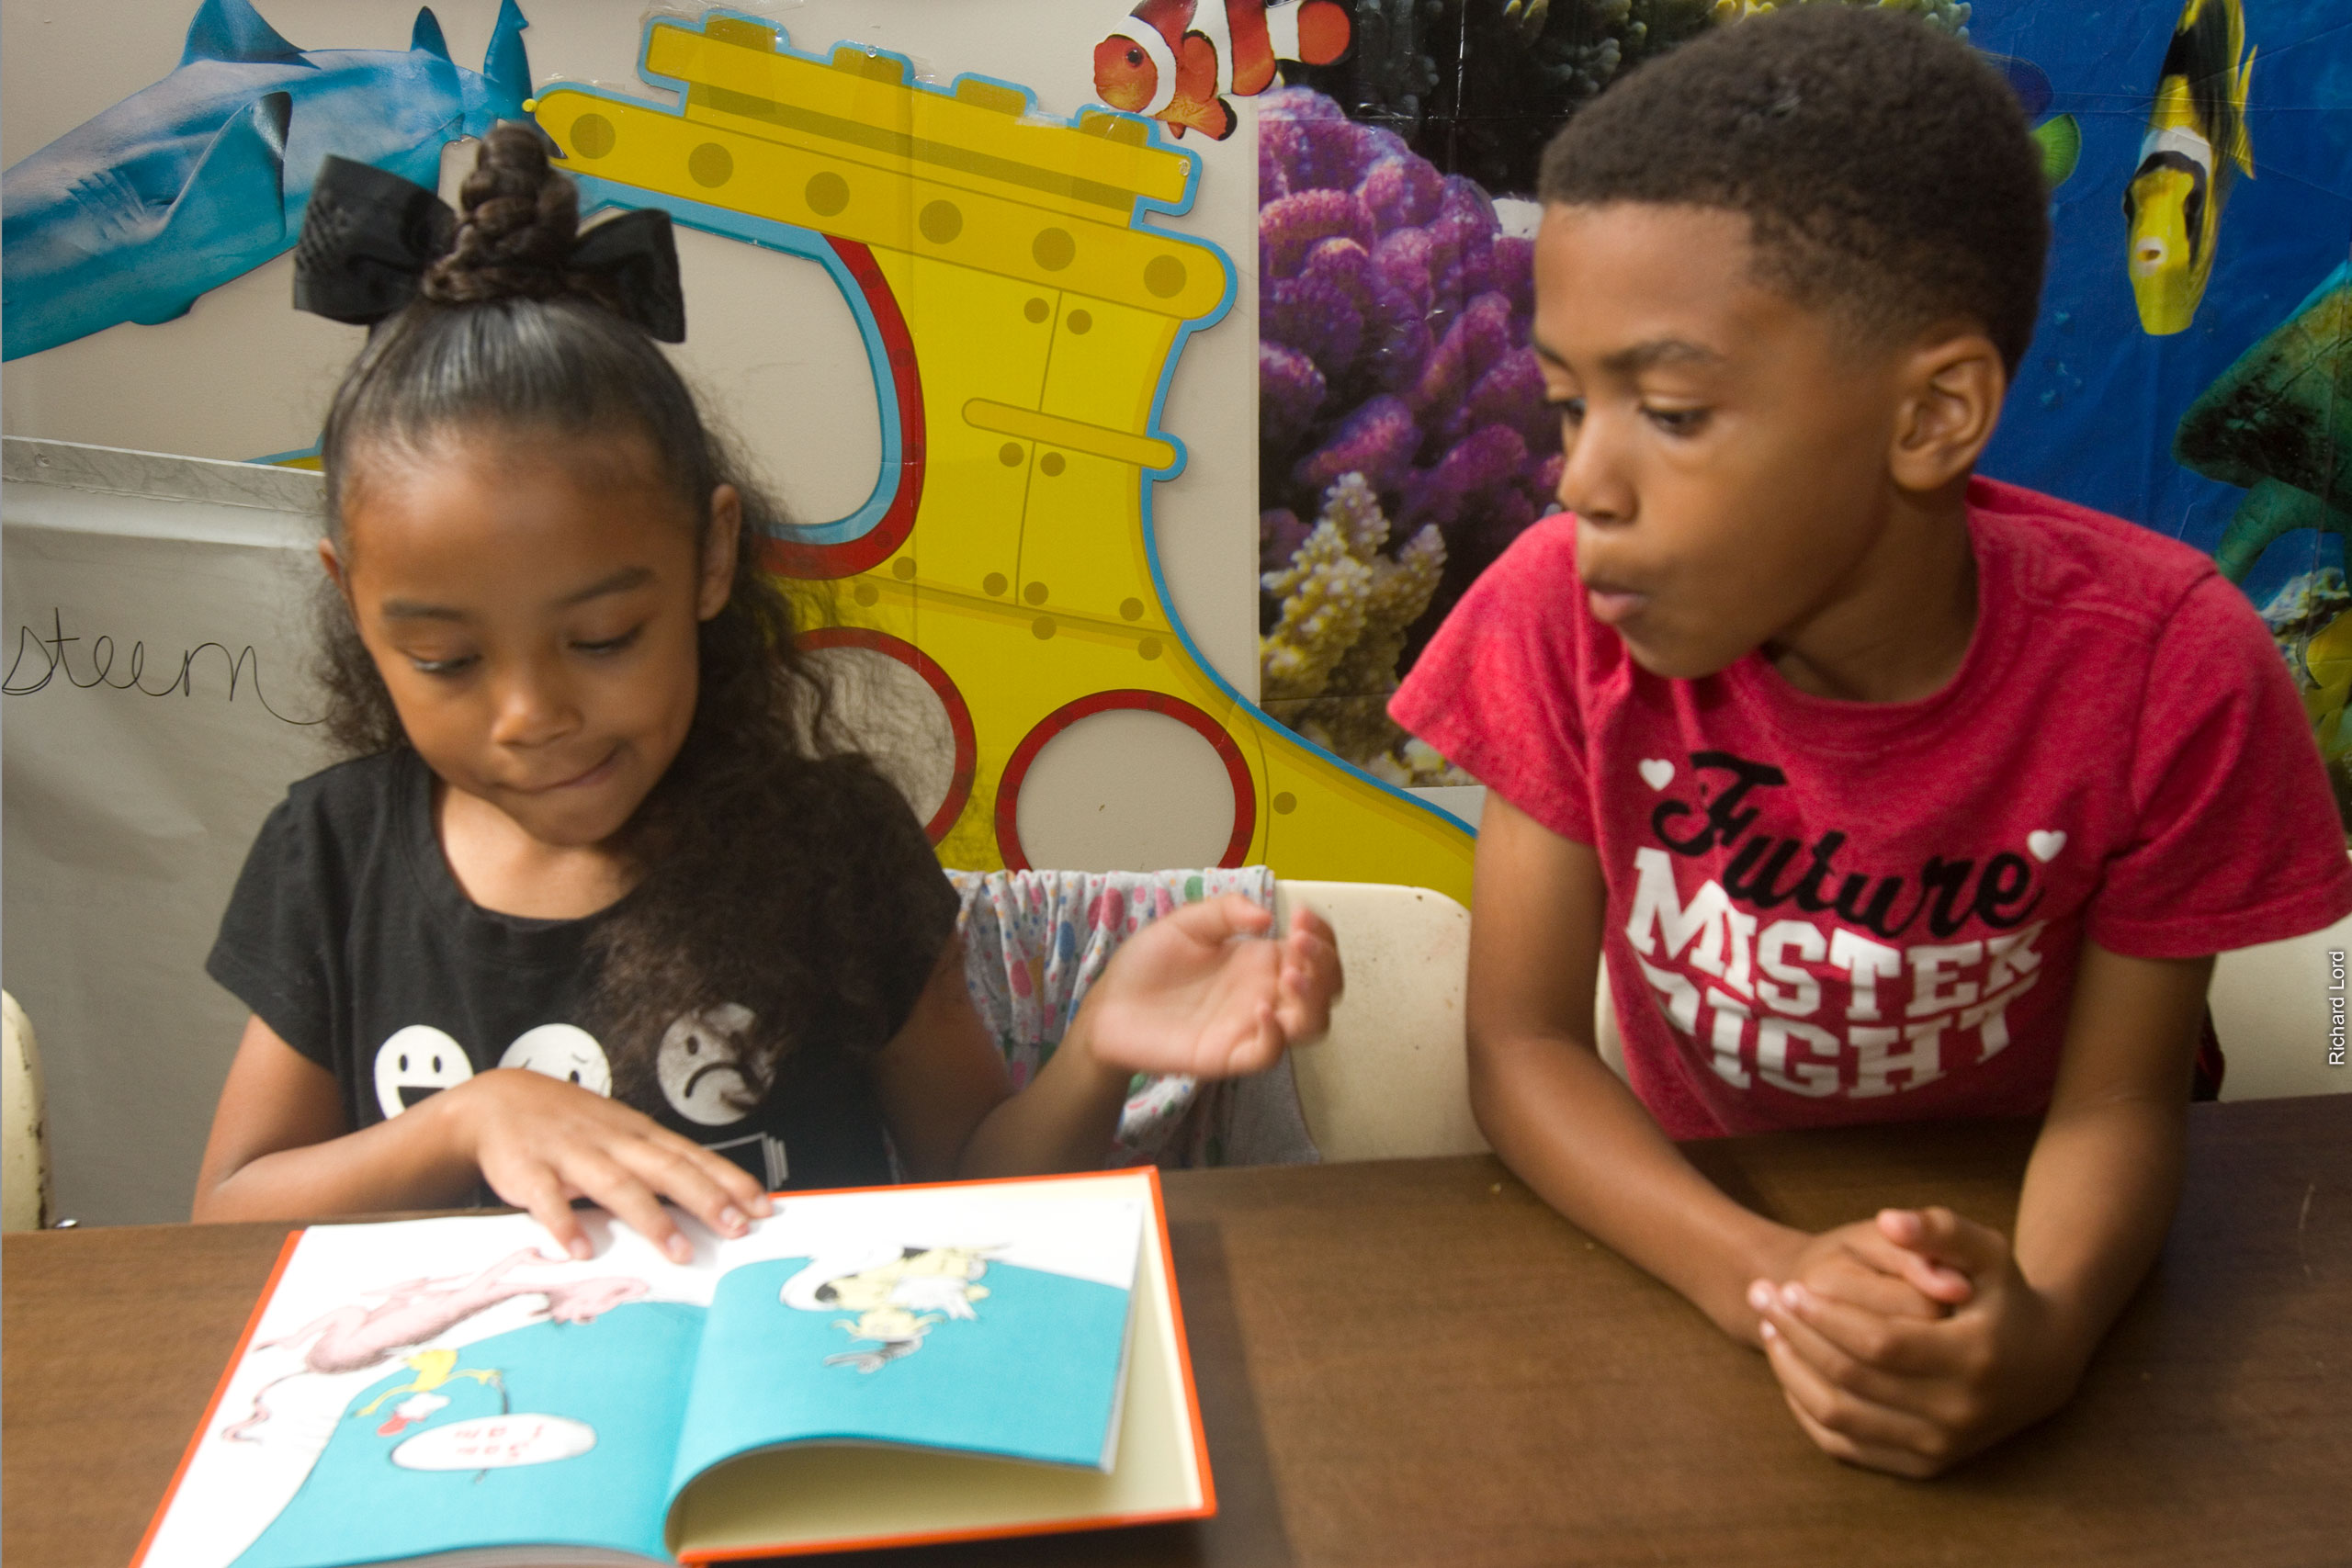 Children read as part of the Reading Enrichment Program at the Wesley Community Center in Dayton, Ohio, a United Methodist Women-supported national mission institution.